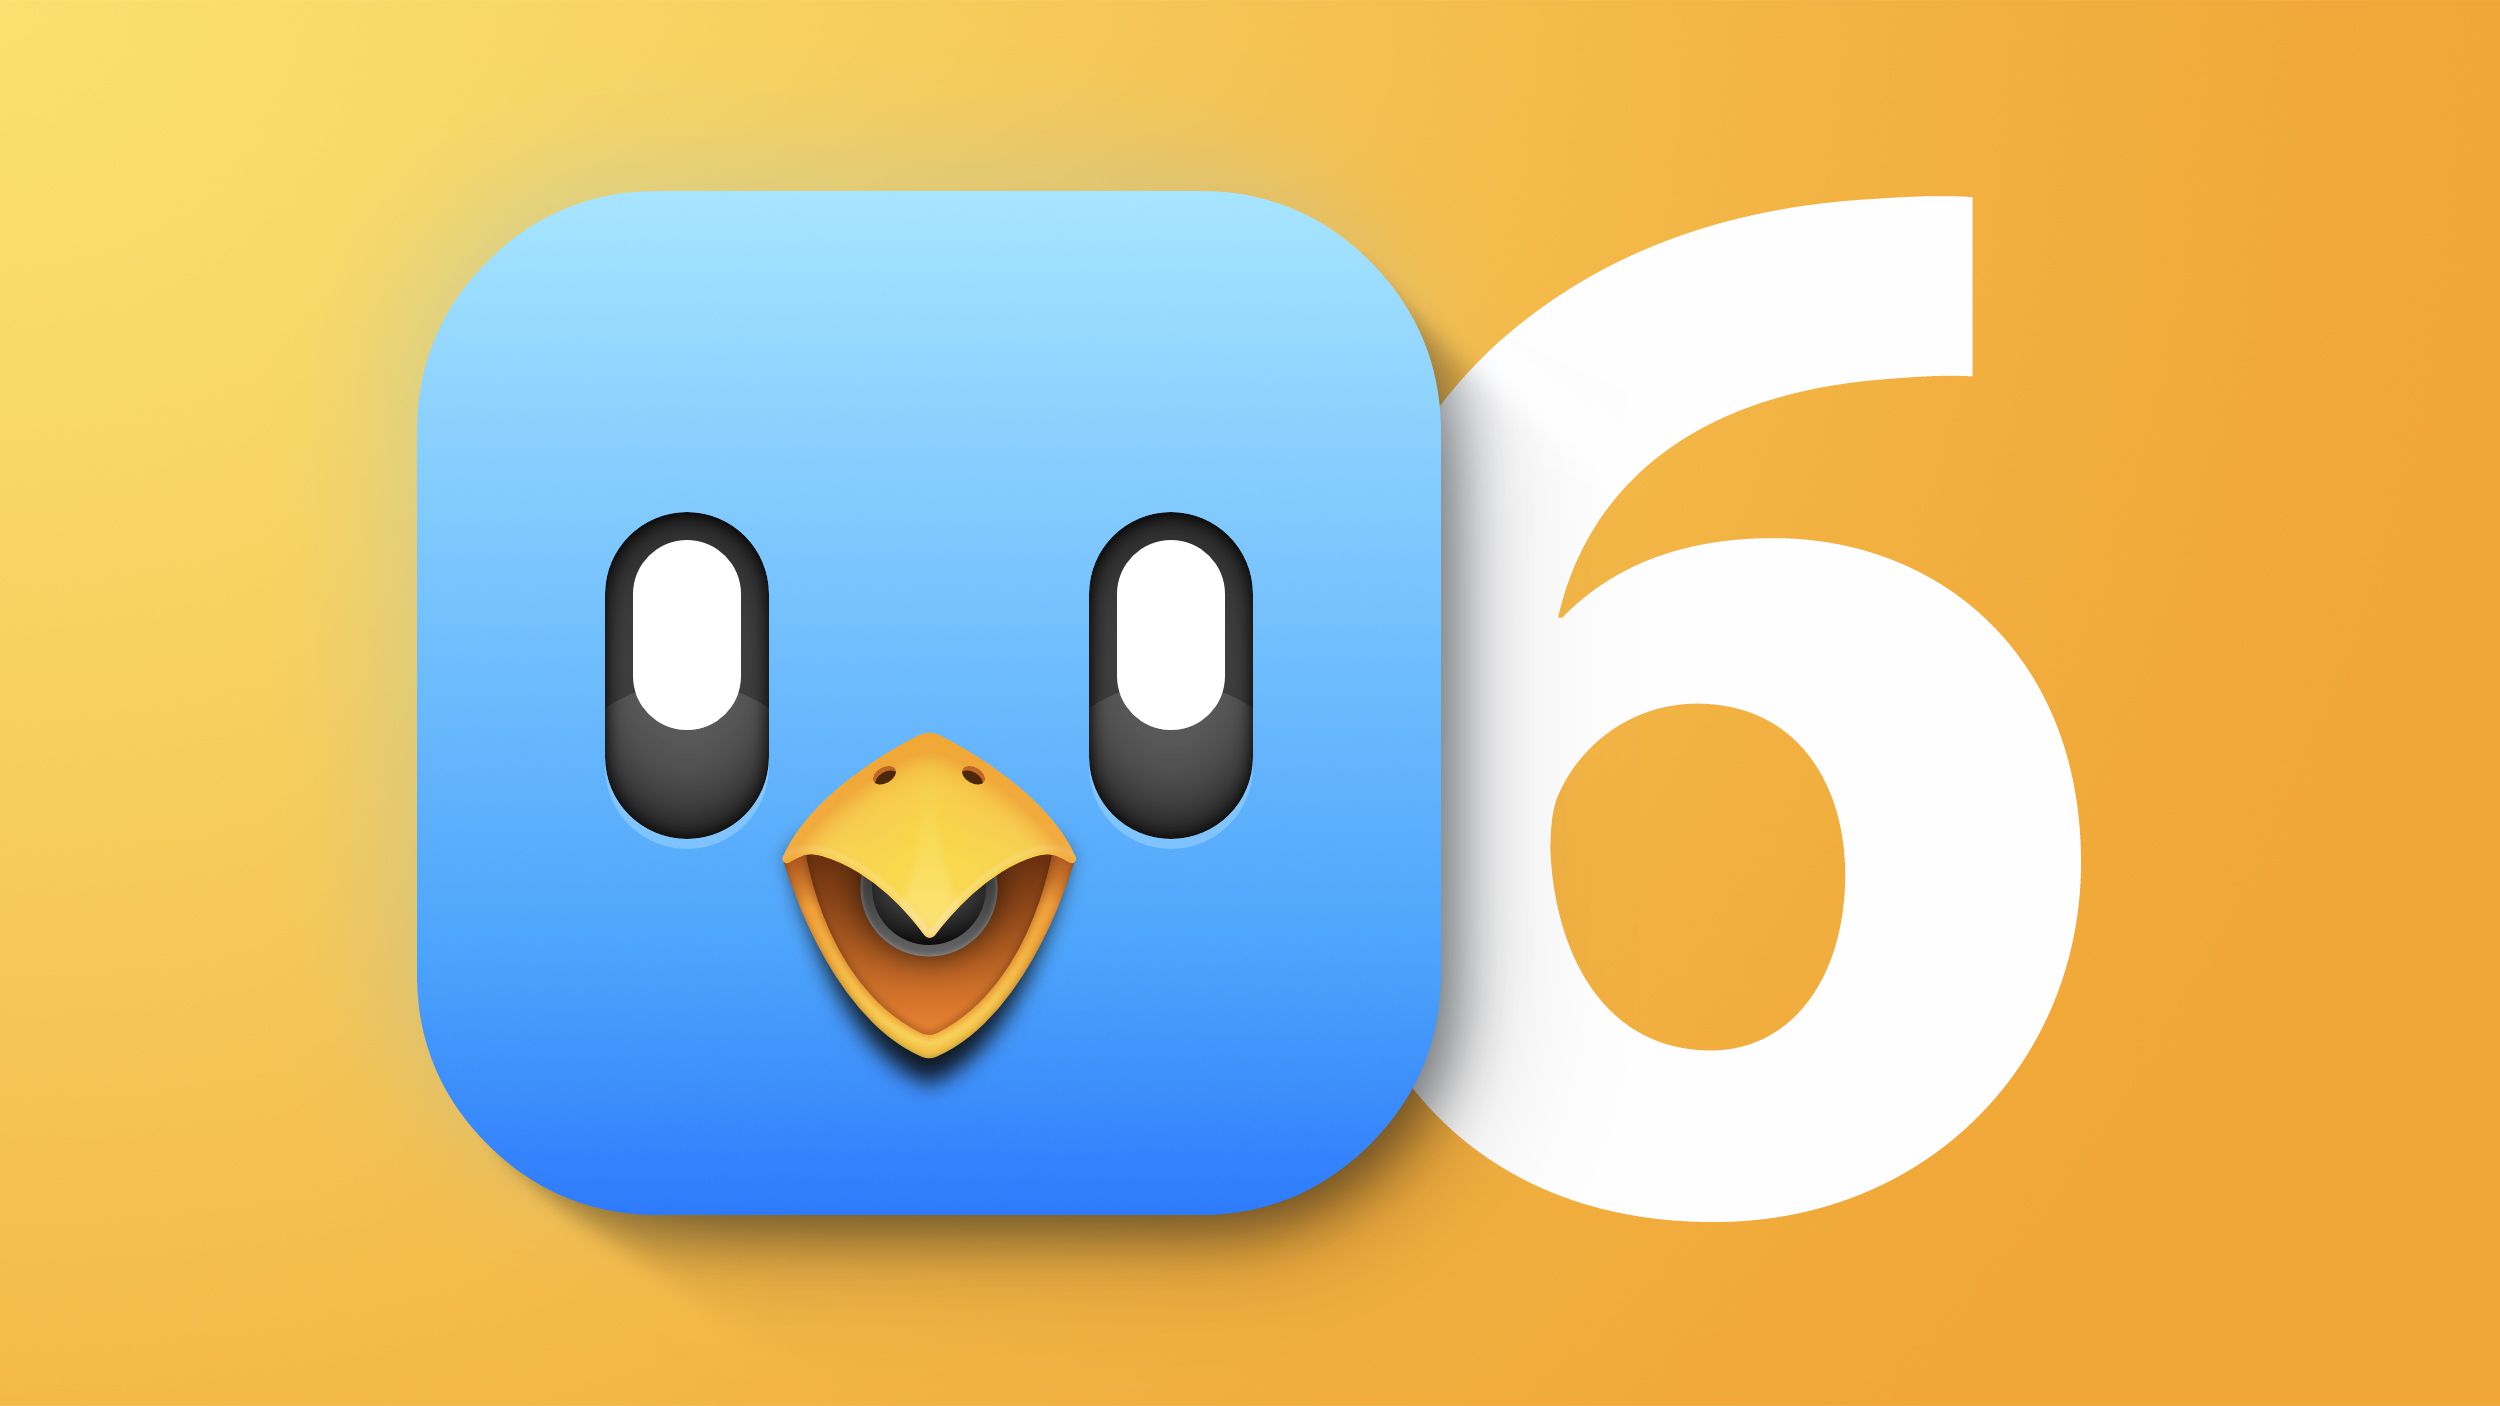 Tweetbot 6 launches with design updates and subscription price